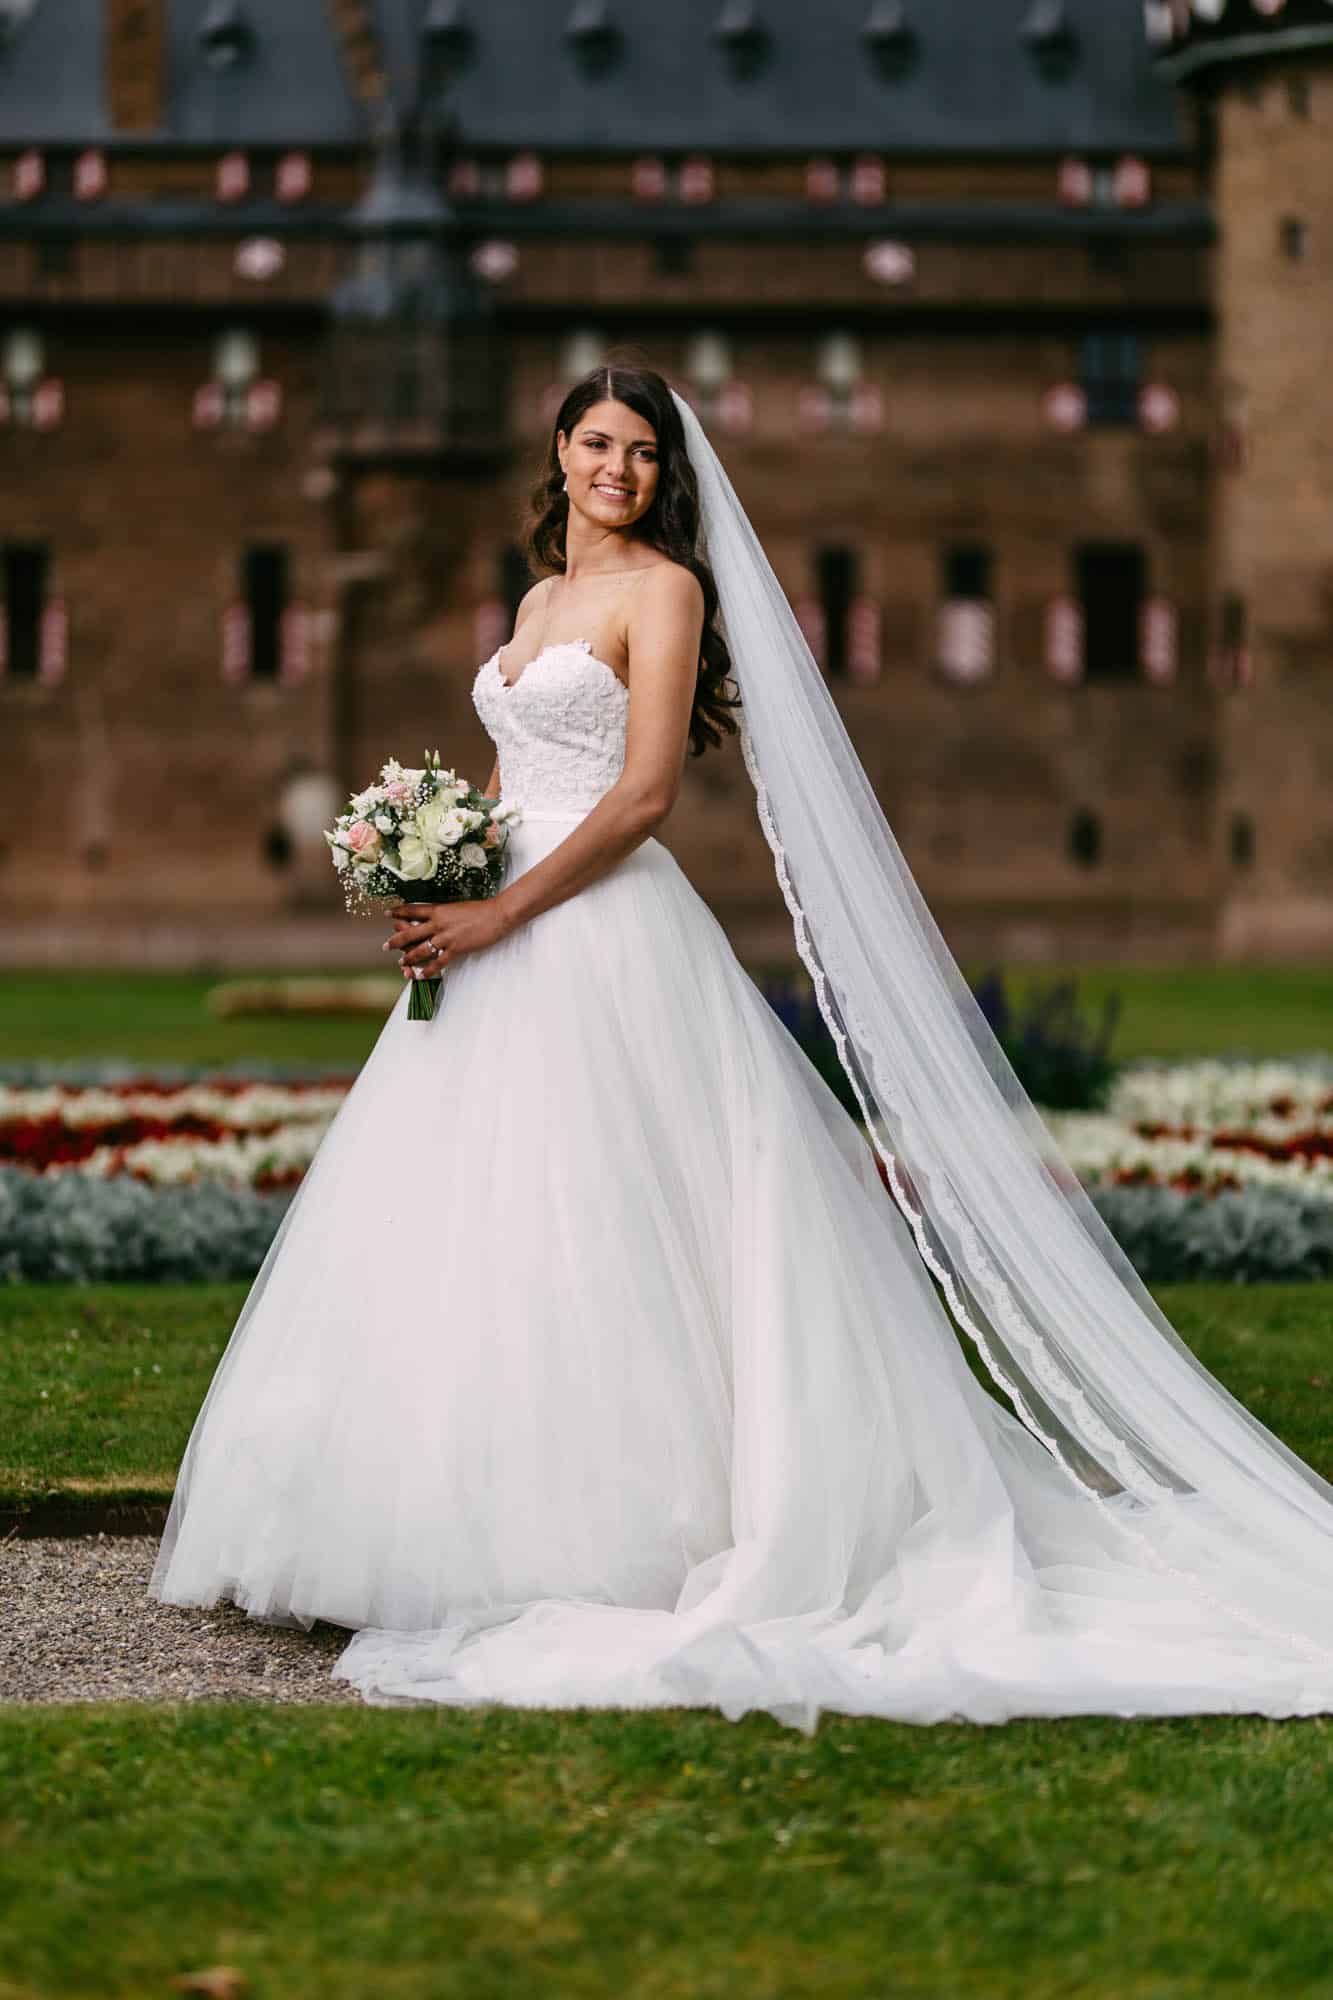 A bride in an A-line wedding dress standing in front of a castle.